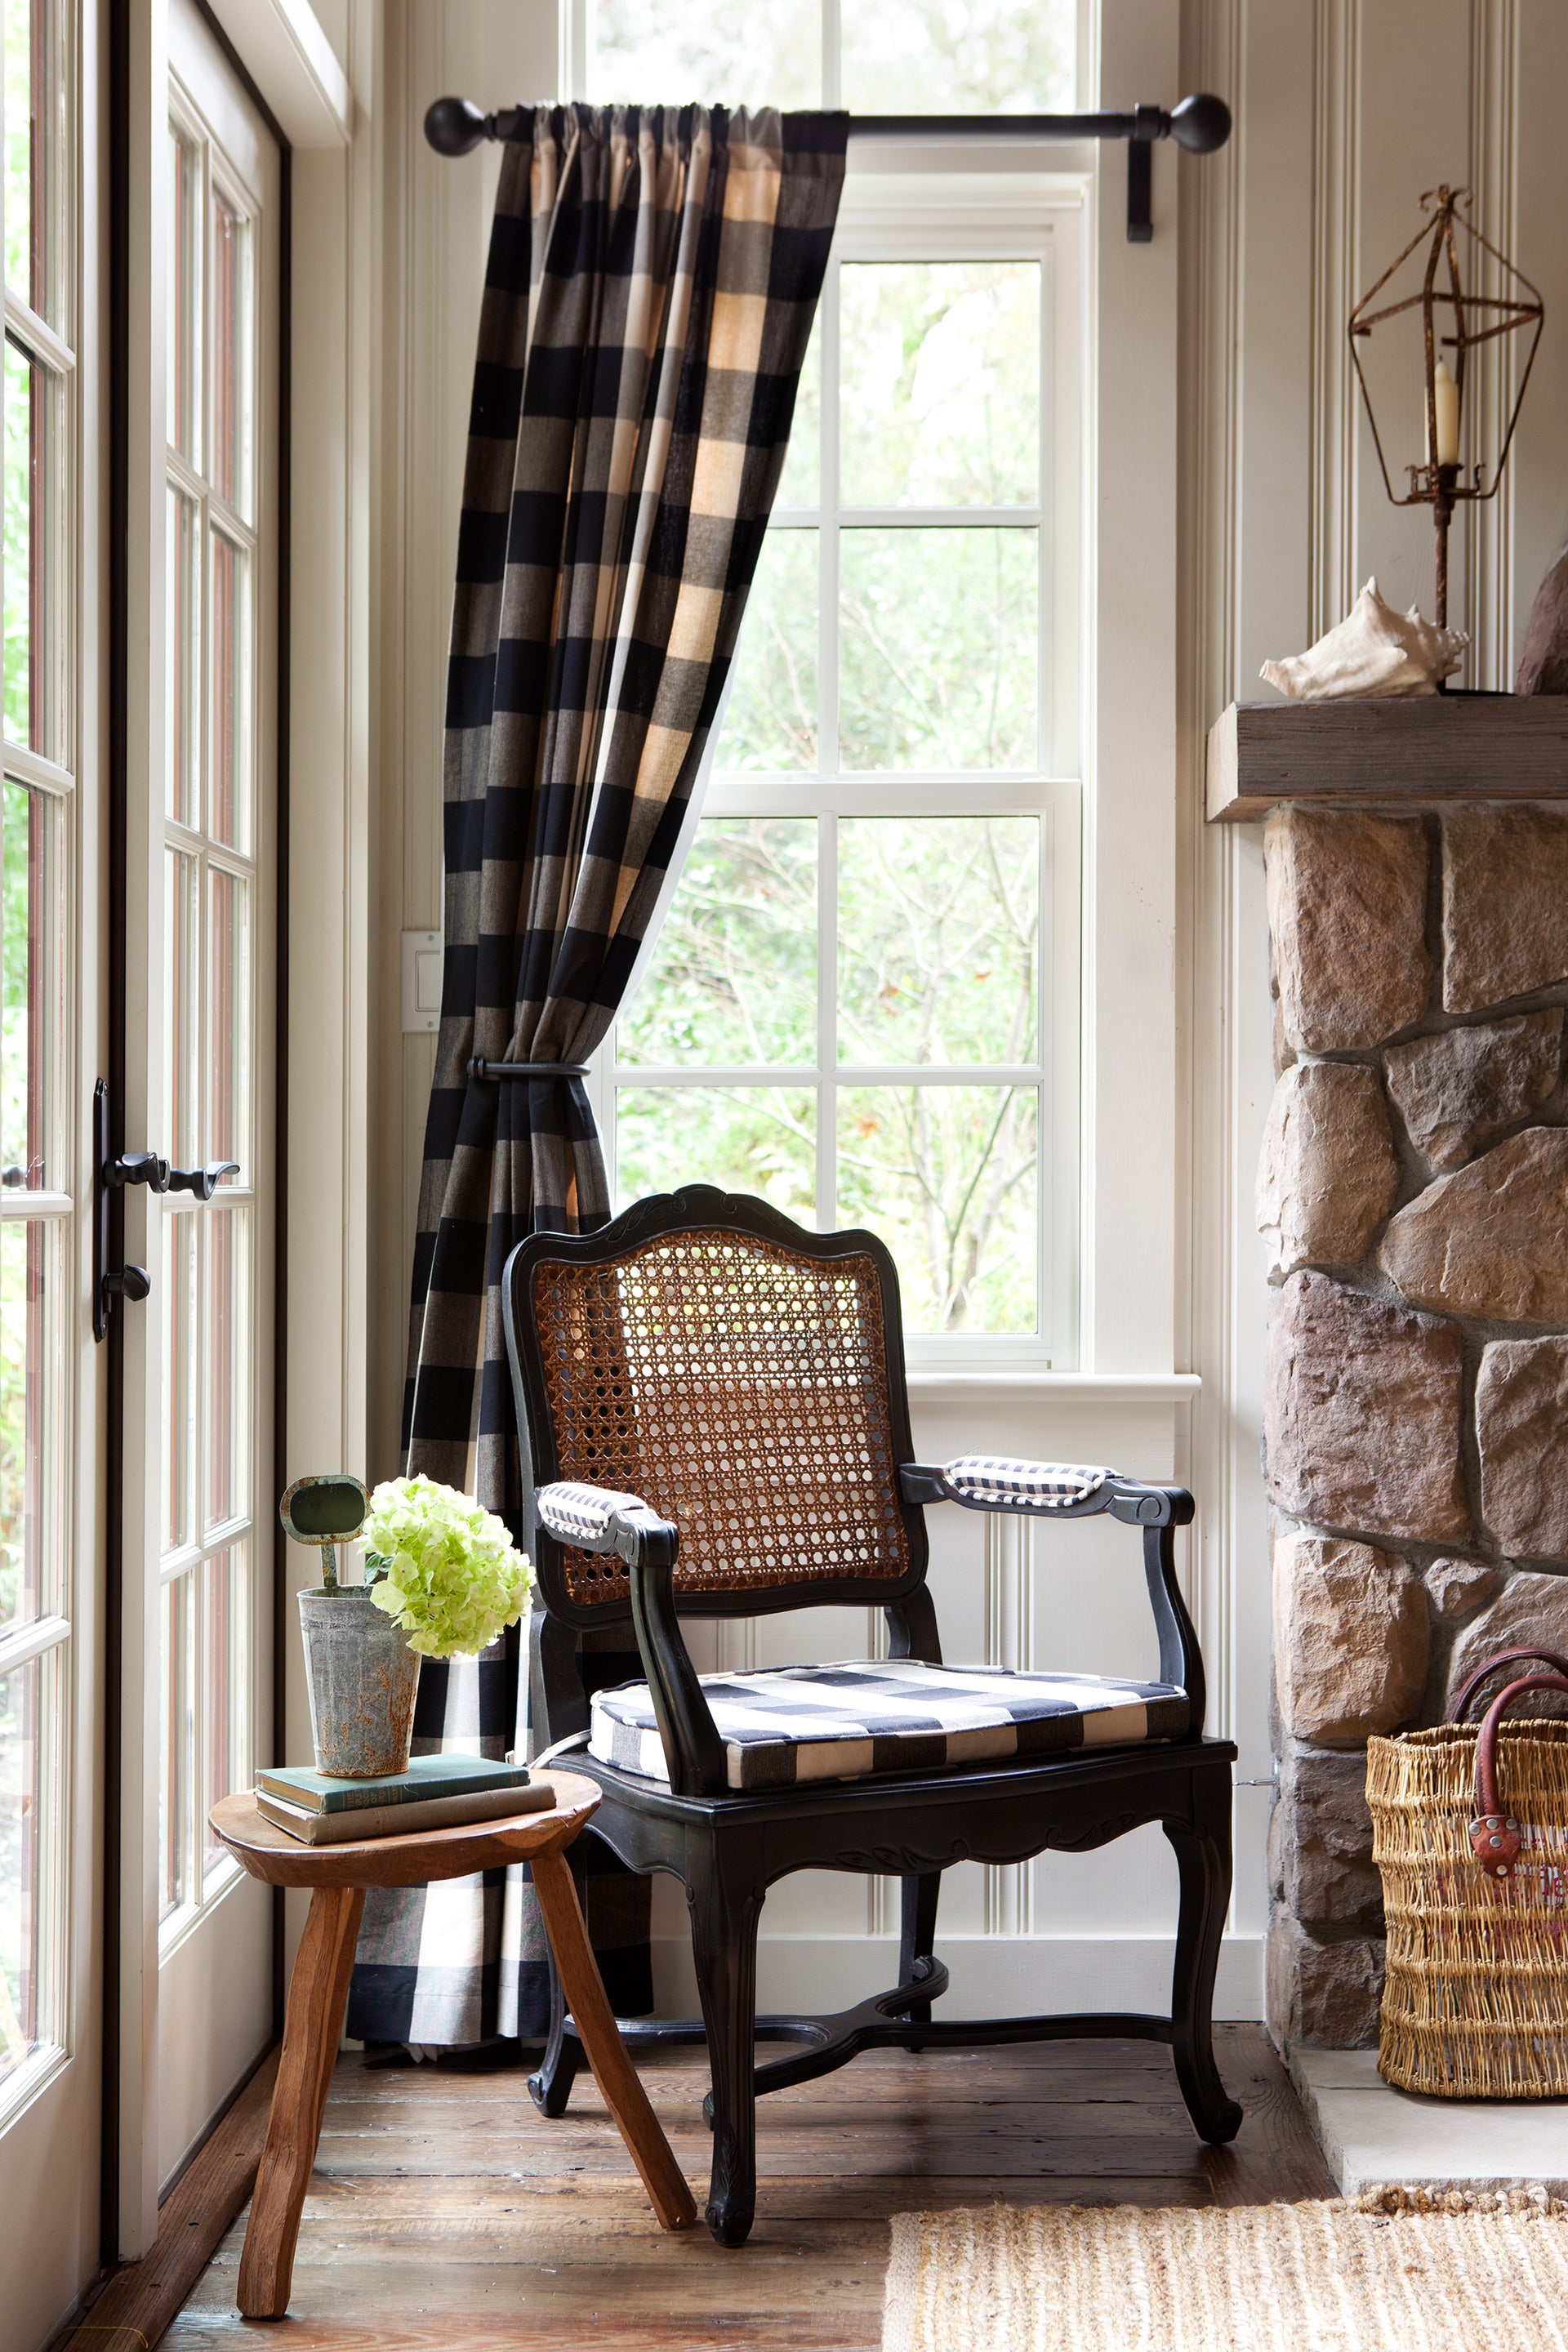 Style of Curtains in Farmhouses and Cabins